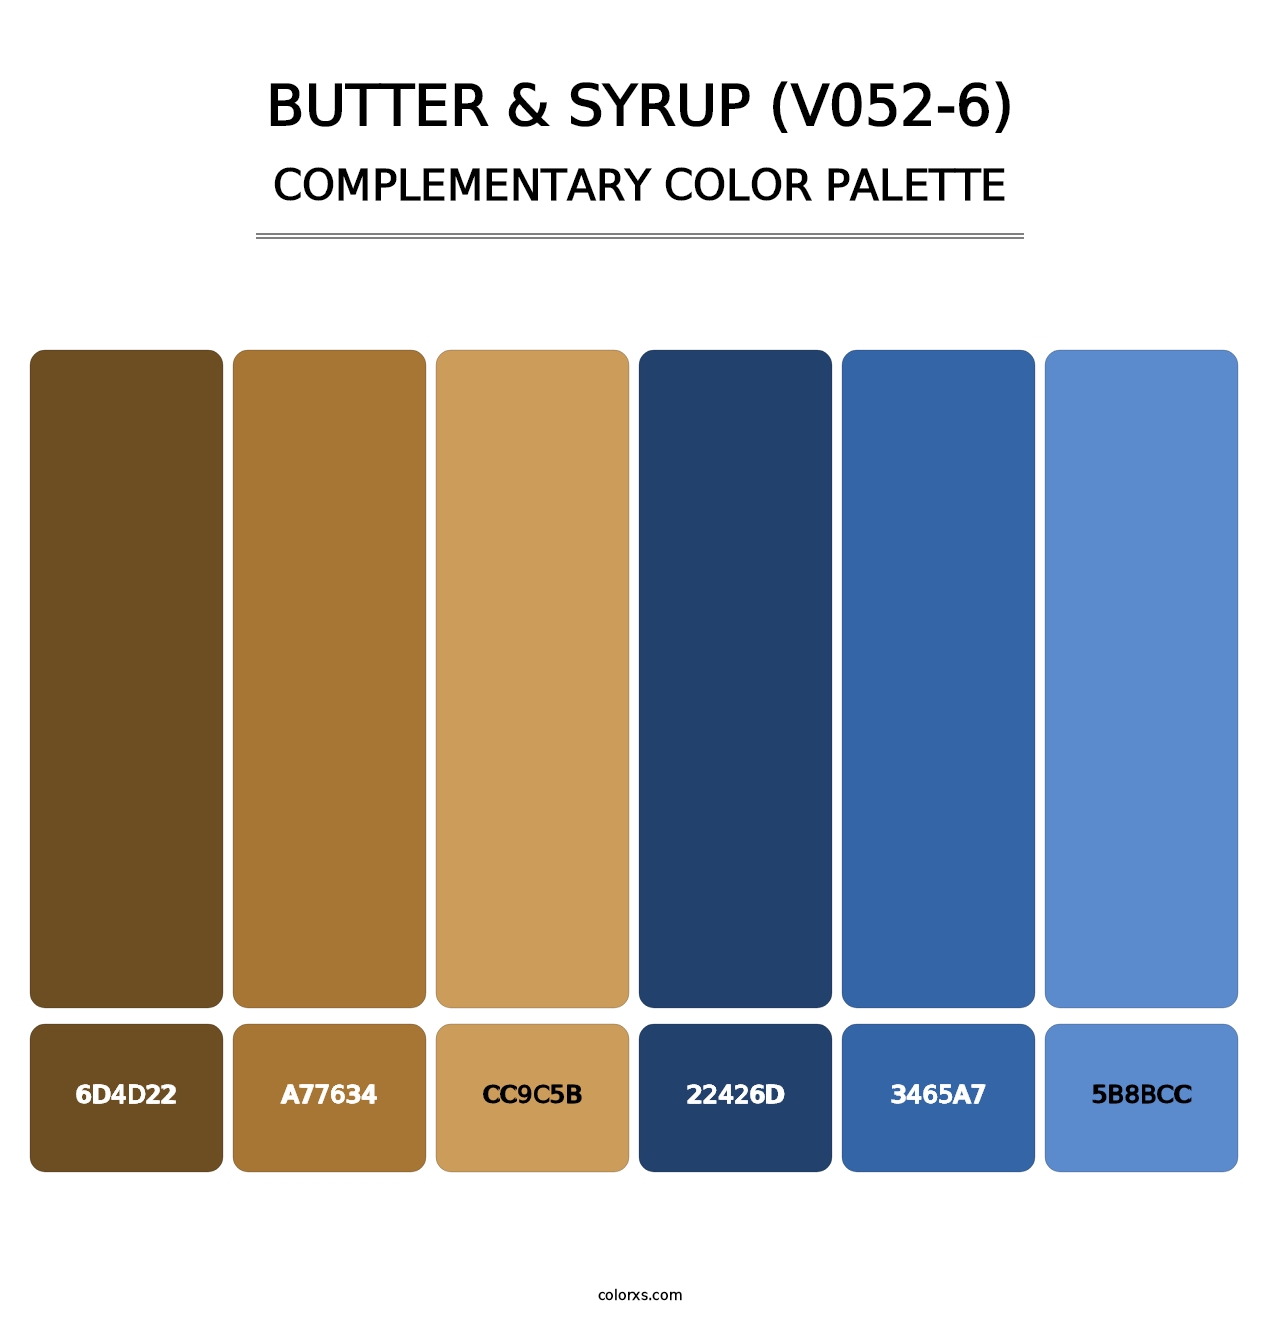 Butter & Syrup (V052-6) - Complementary Color Palette